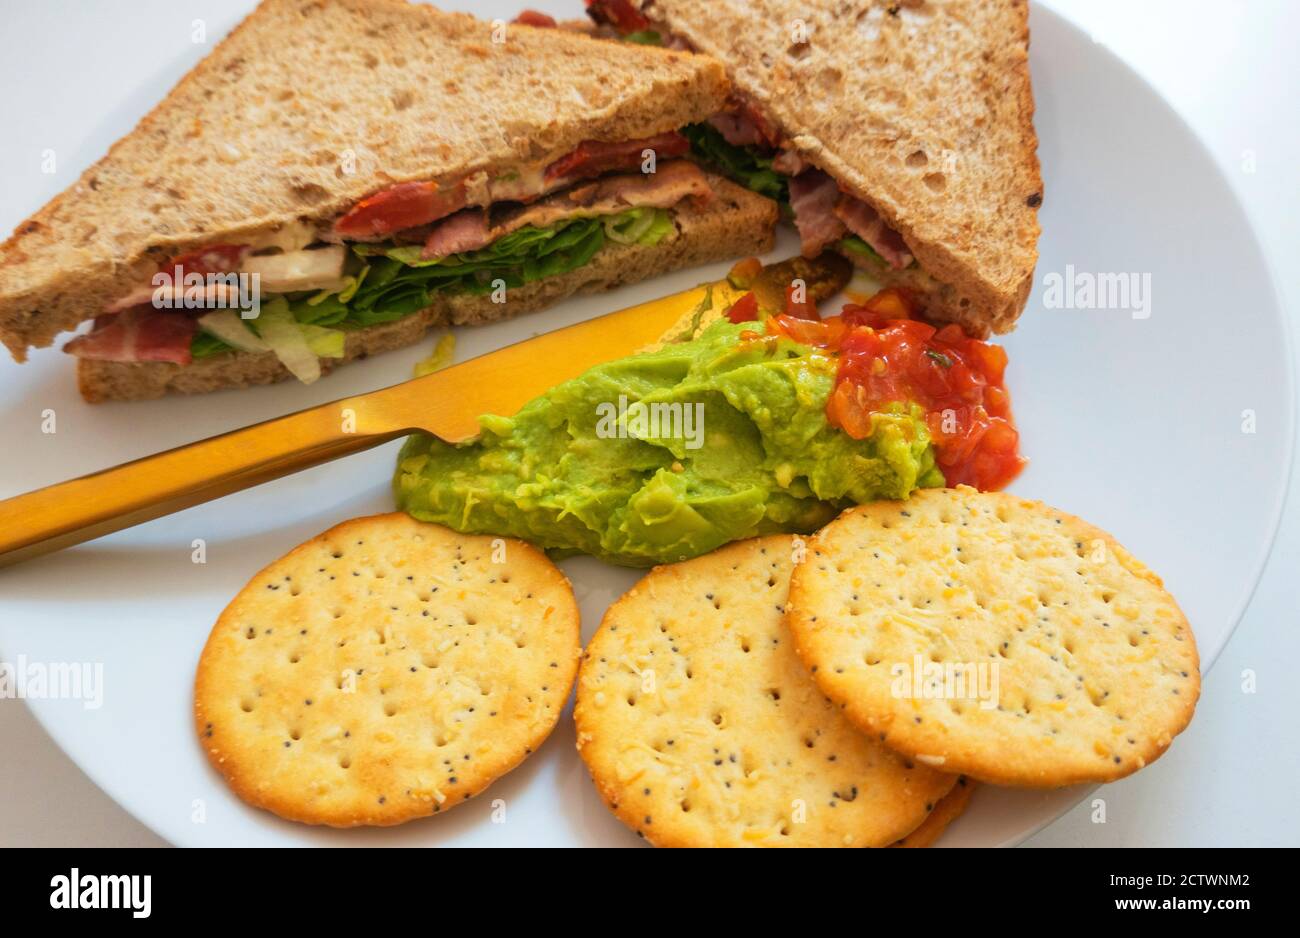 BLT, bacon, lettuce, and tomato sandwich on brown bread with guacamole and salsa and crackers Stock Photo